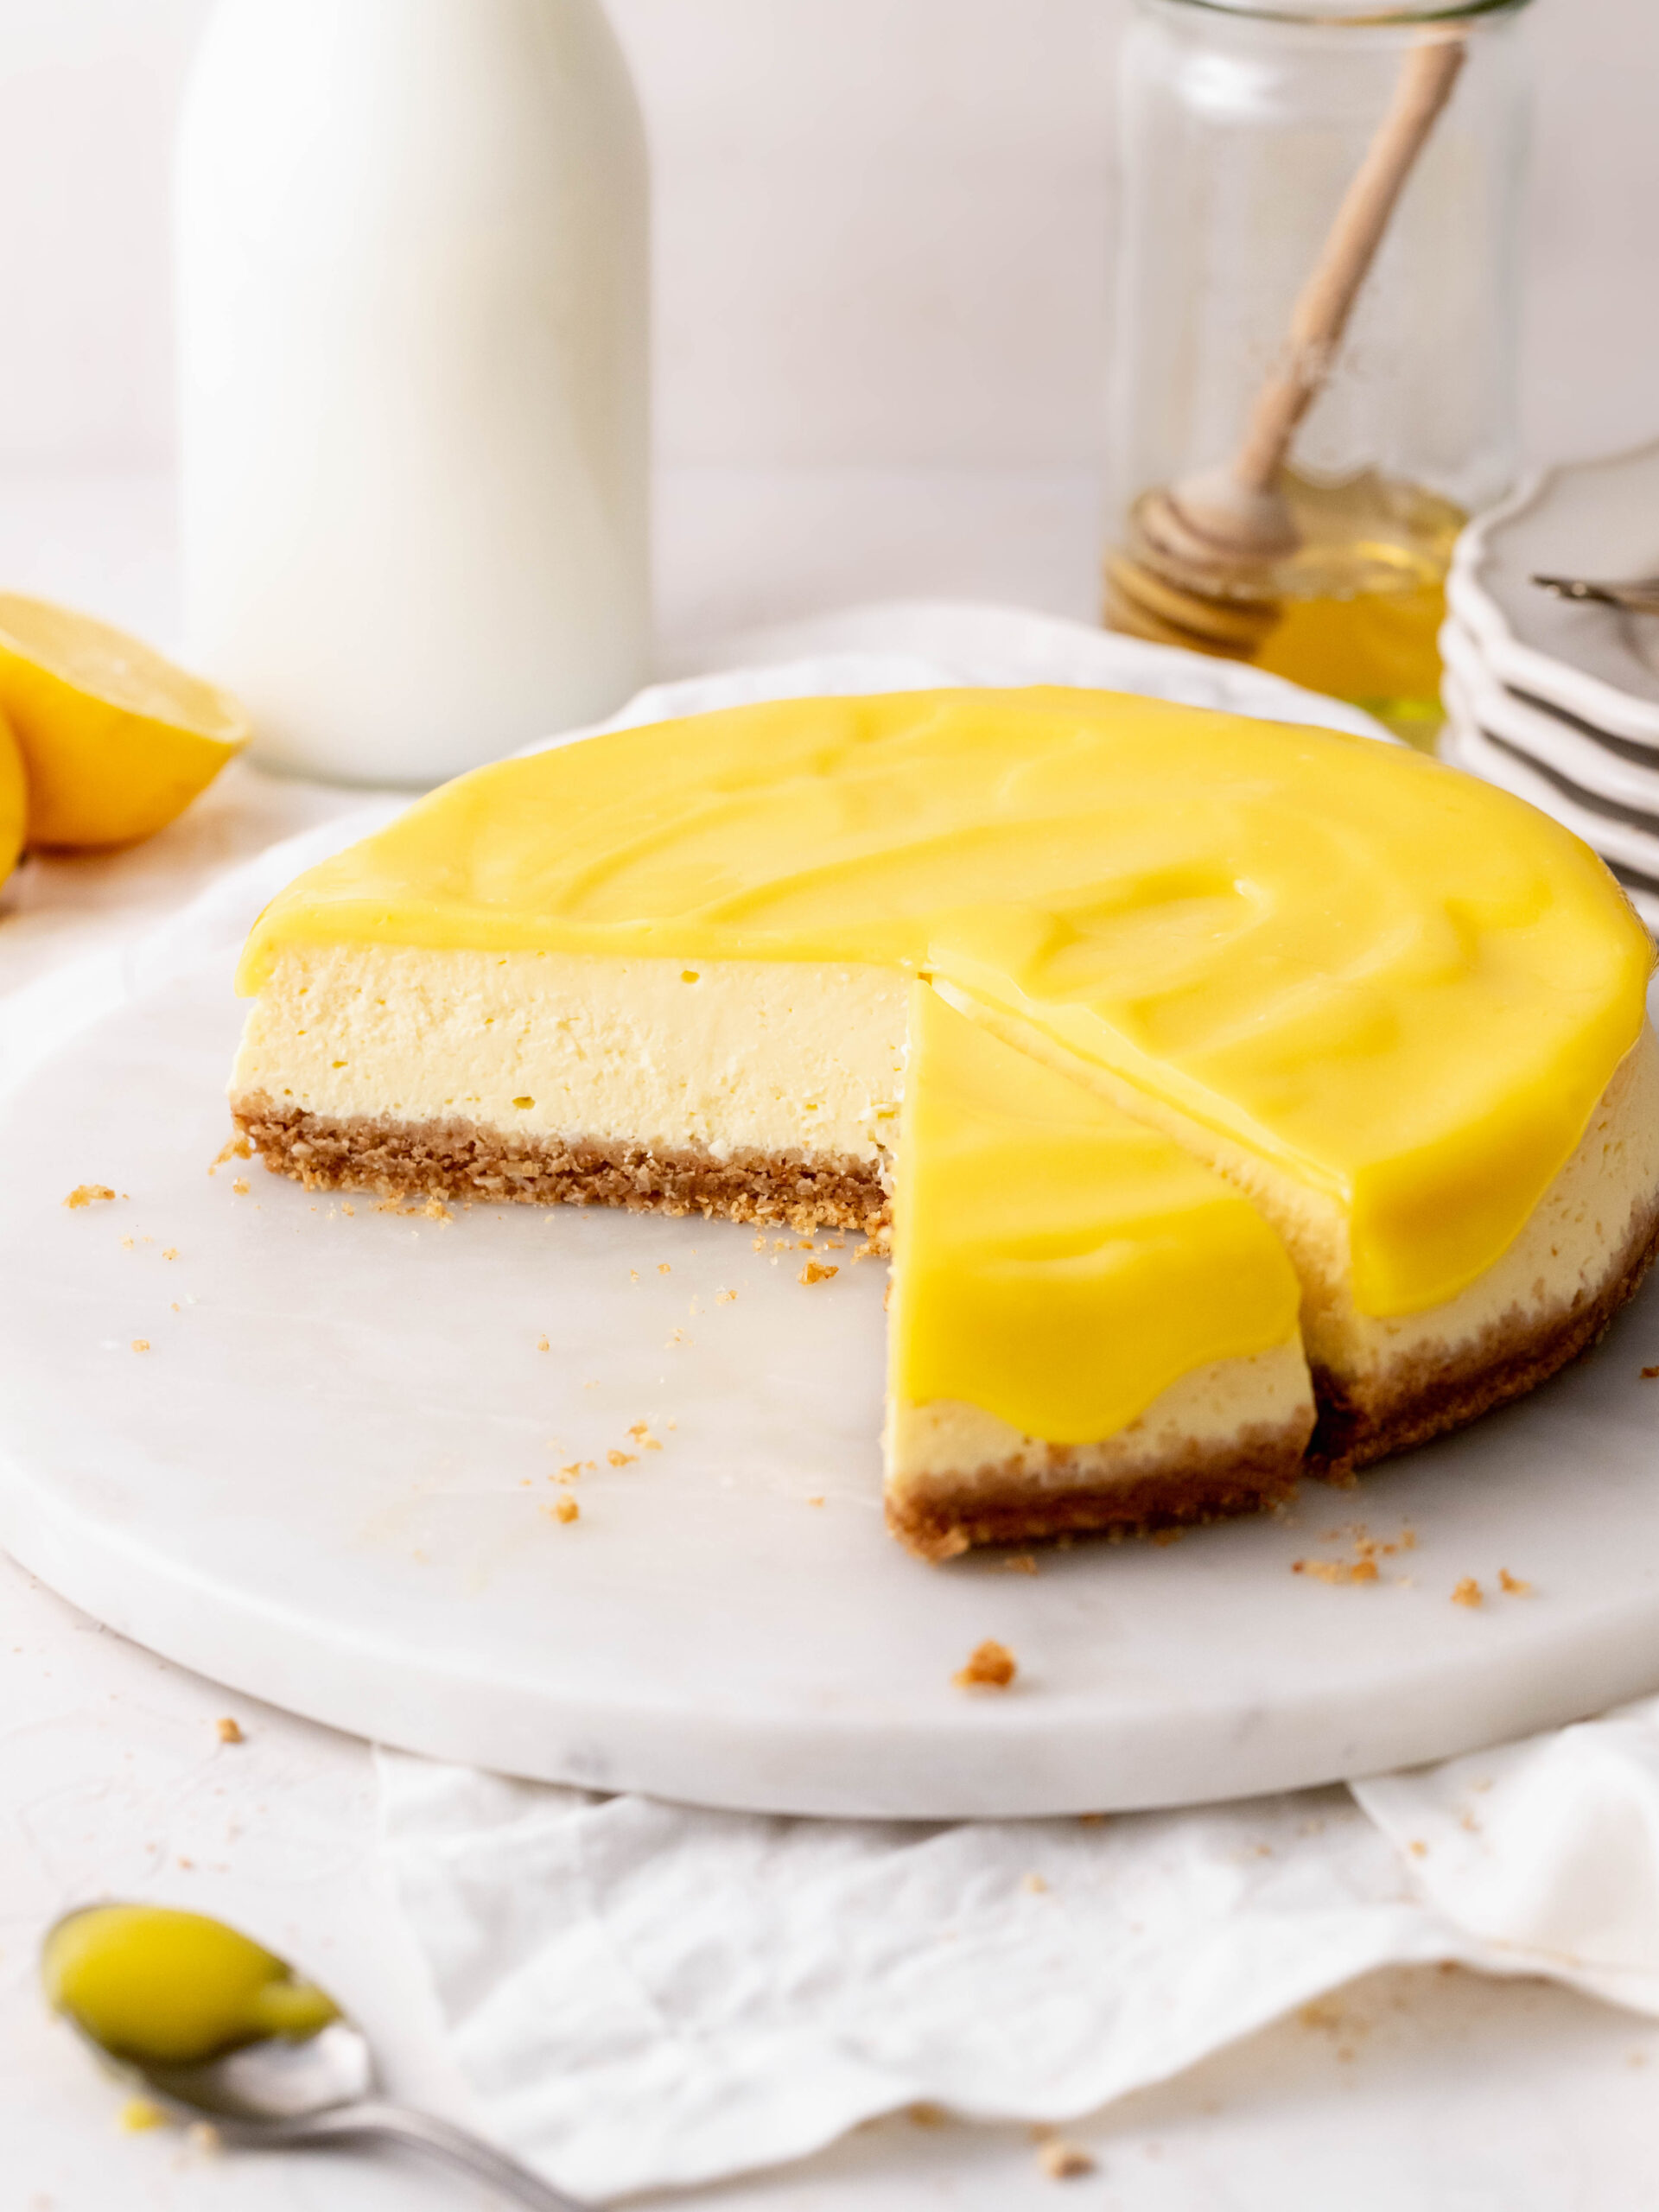 Slices cut into honey and lemon cheesecake.